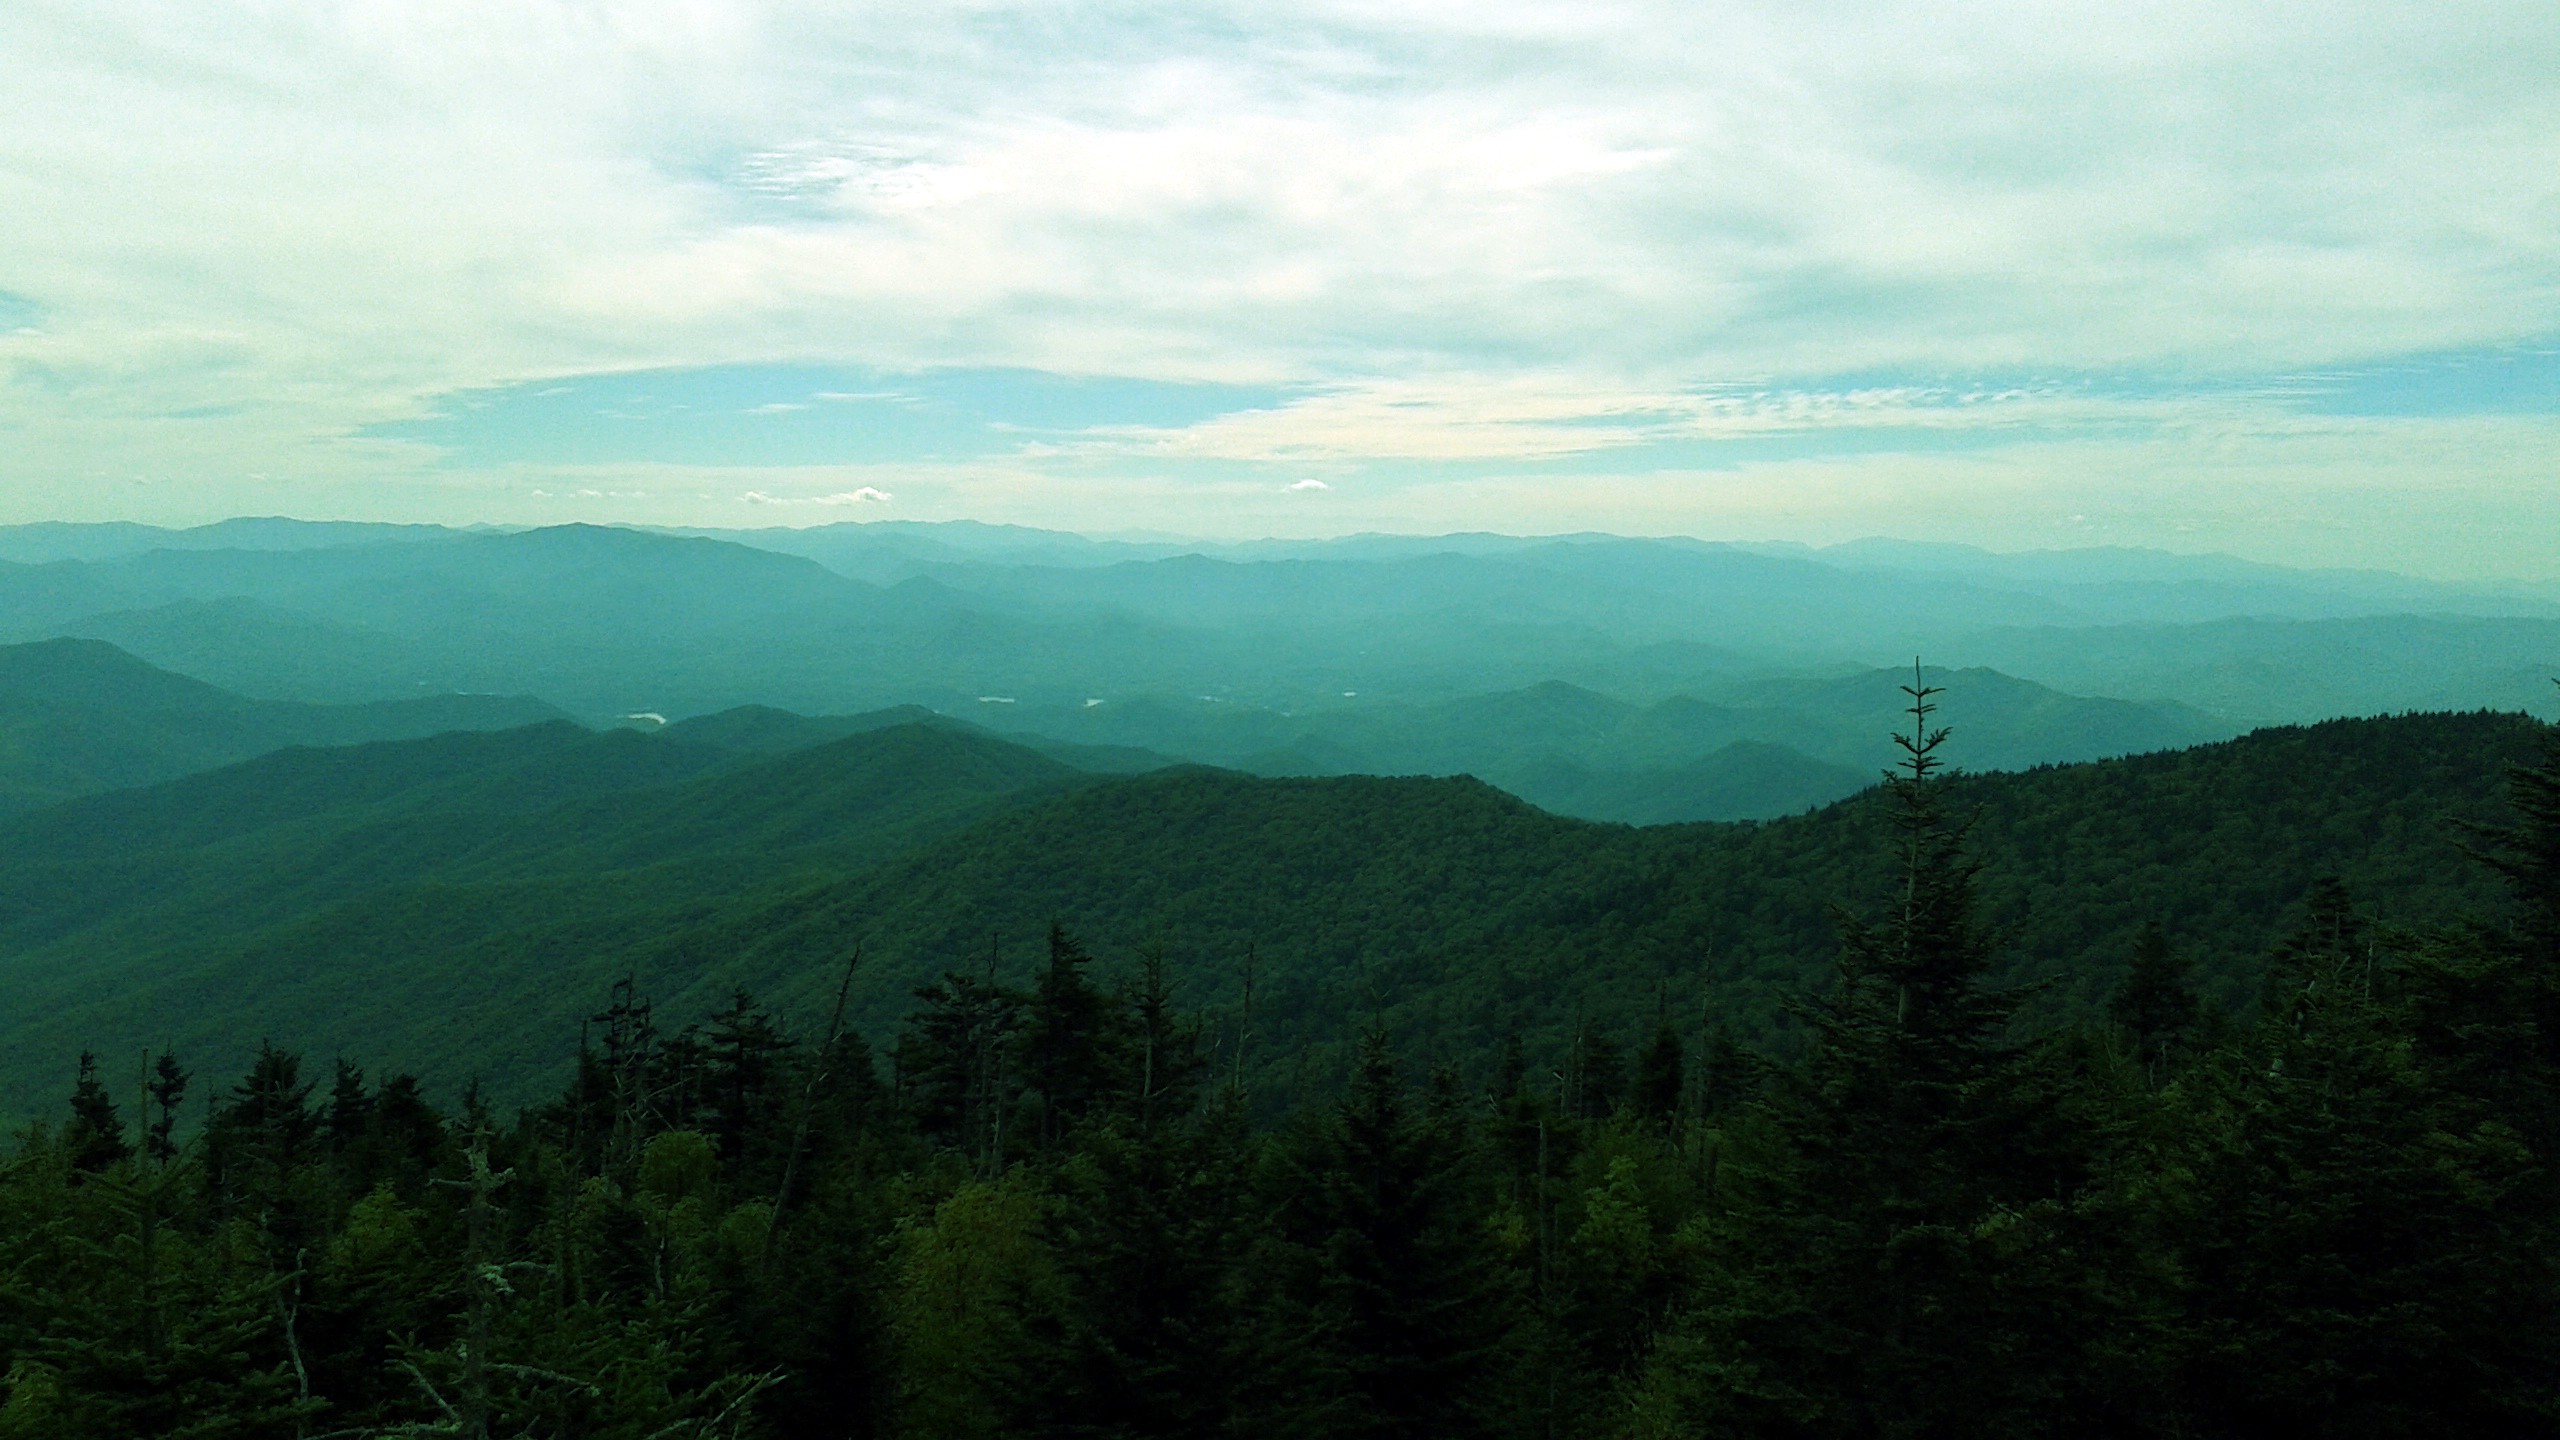  Smoky  Mountains  Tennessee Forest Mountain  Landscape  